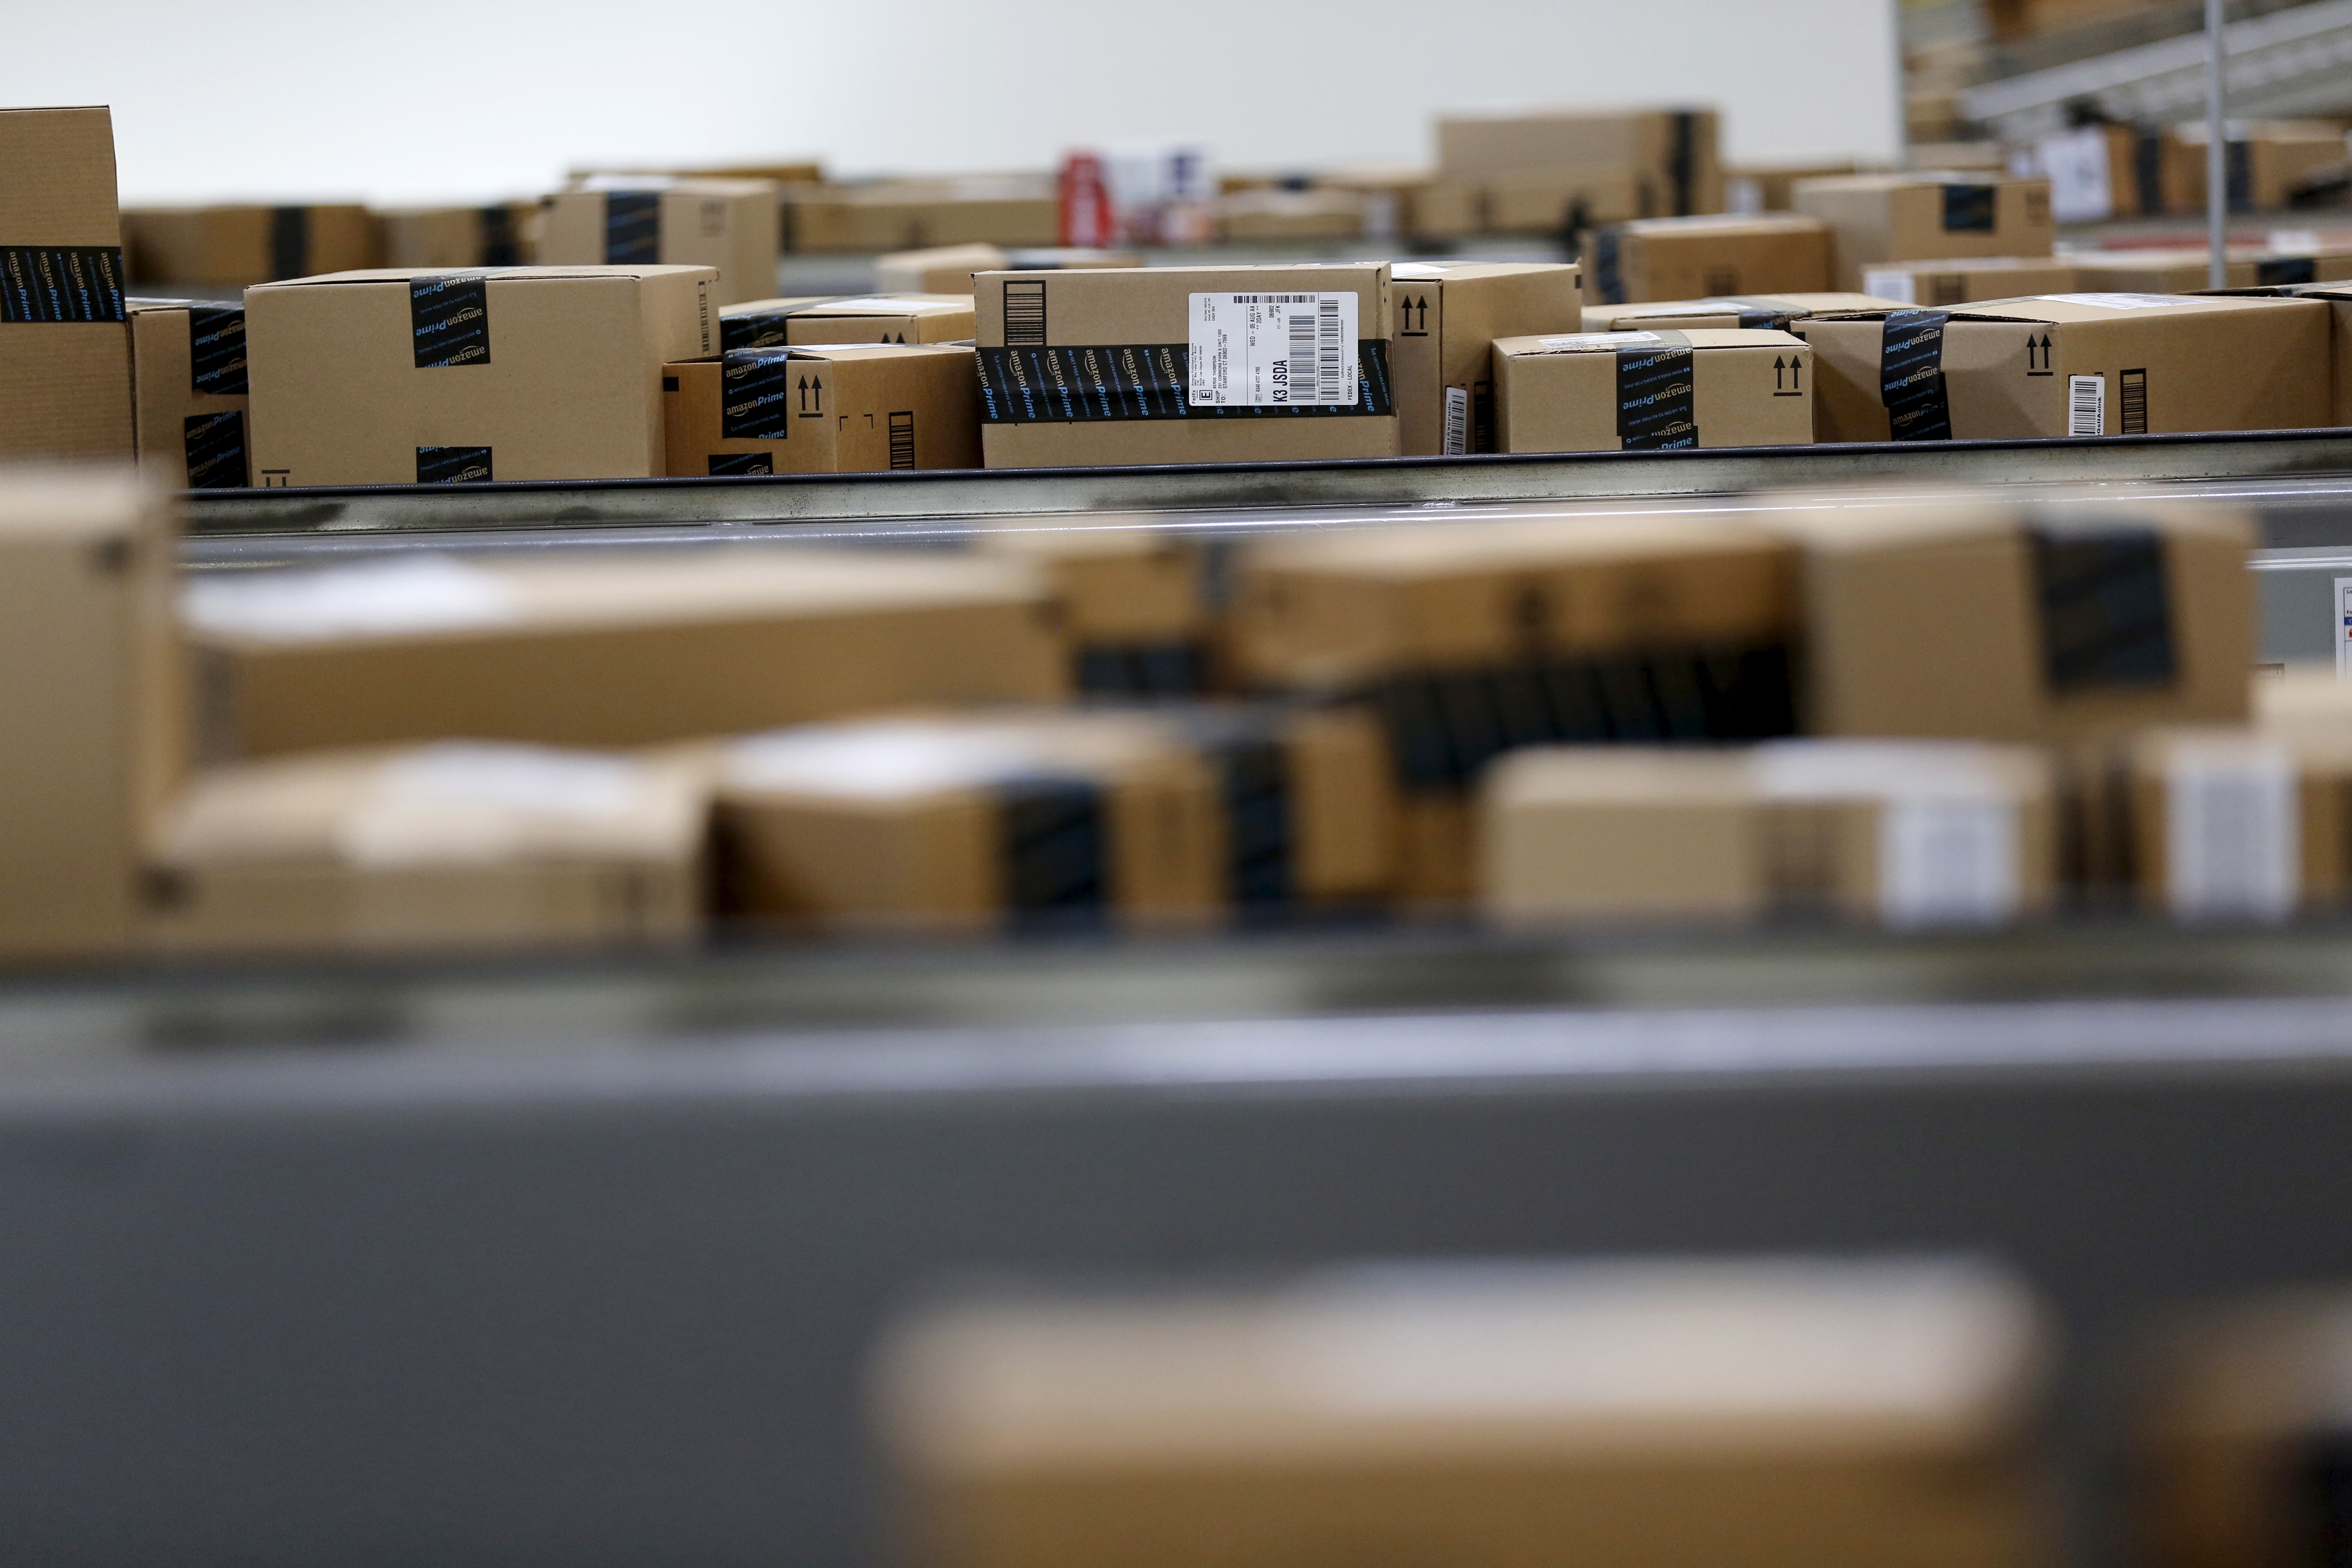 Packaged products that are ready for shipment are seen at an Amazon Fulfilment Center in Tracy